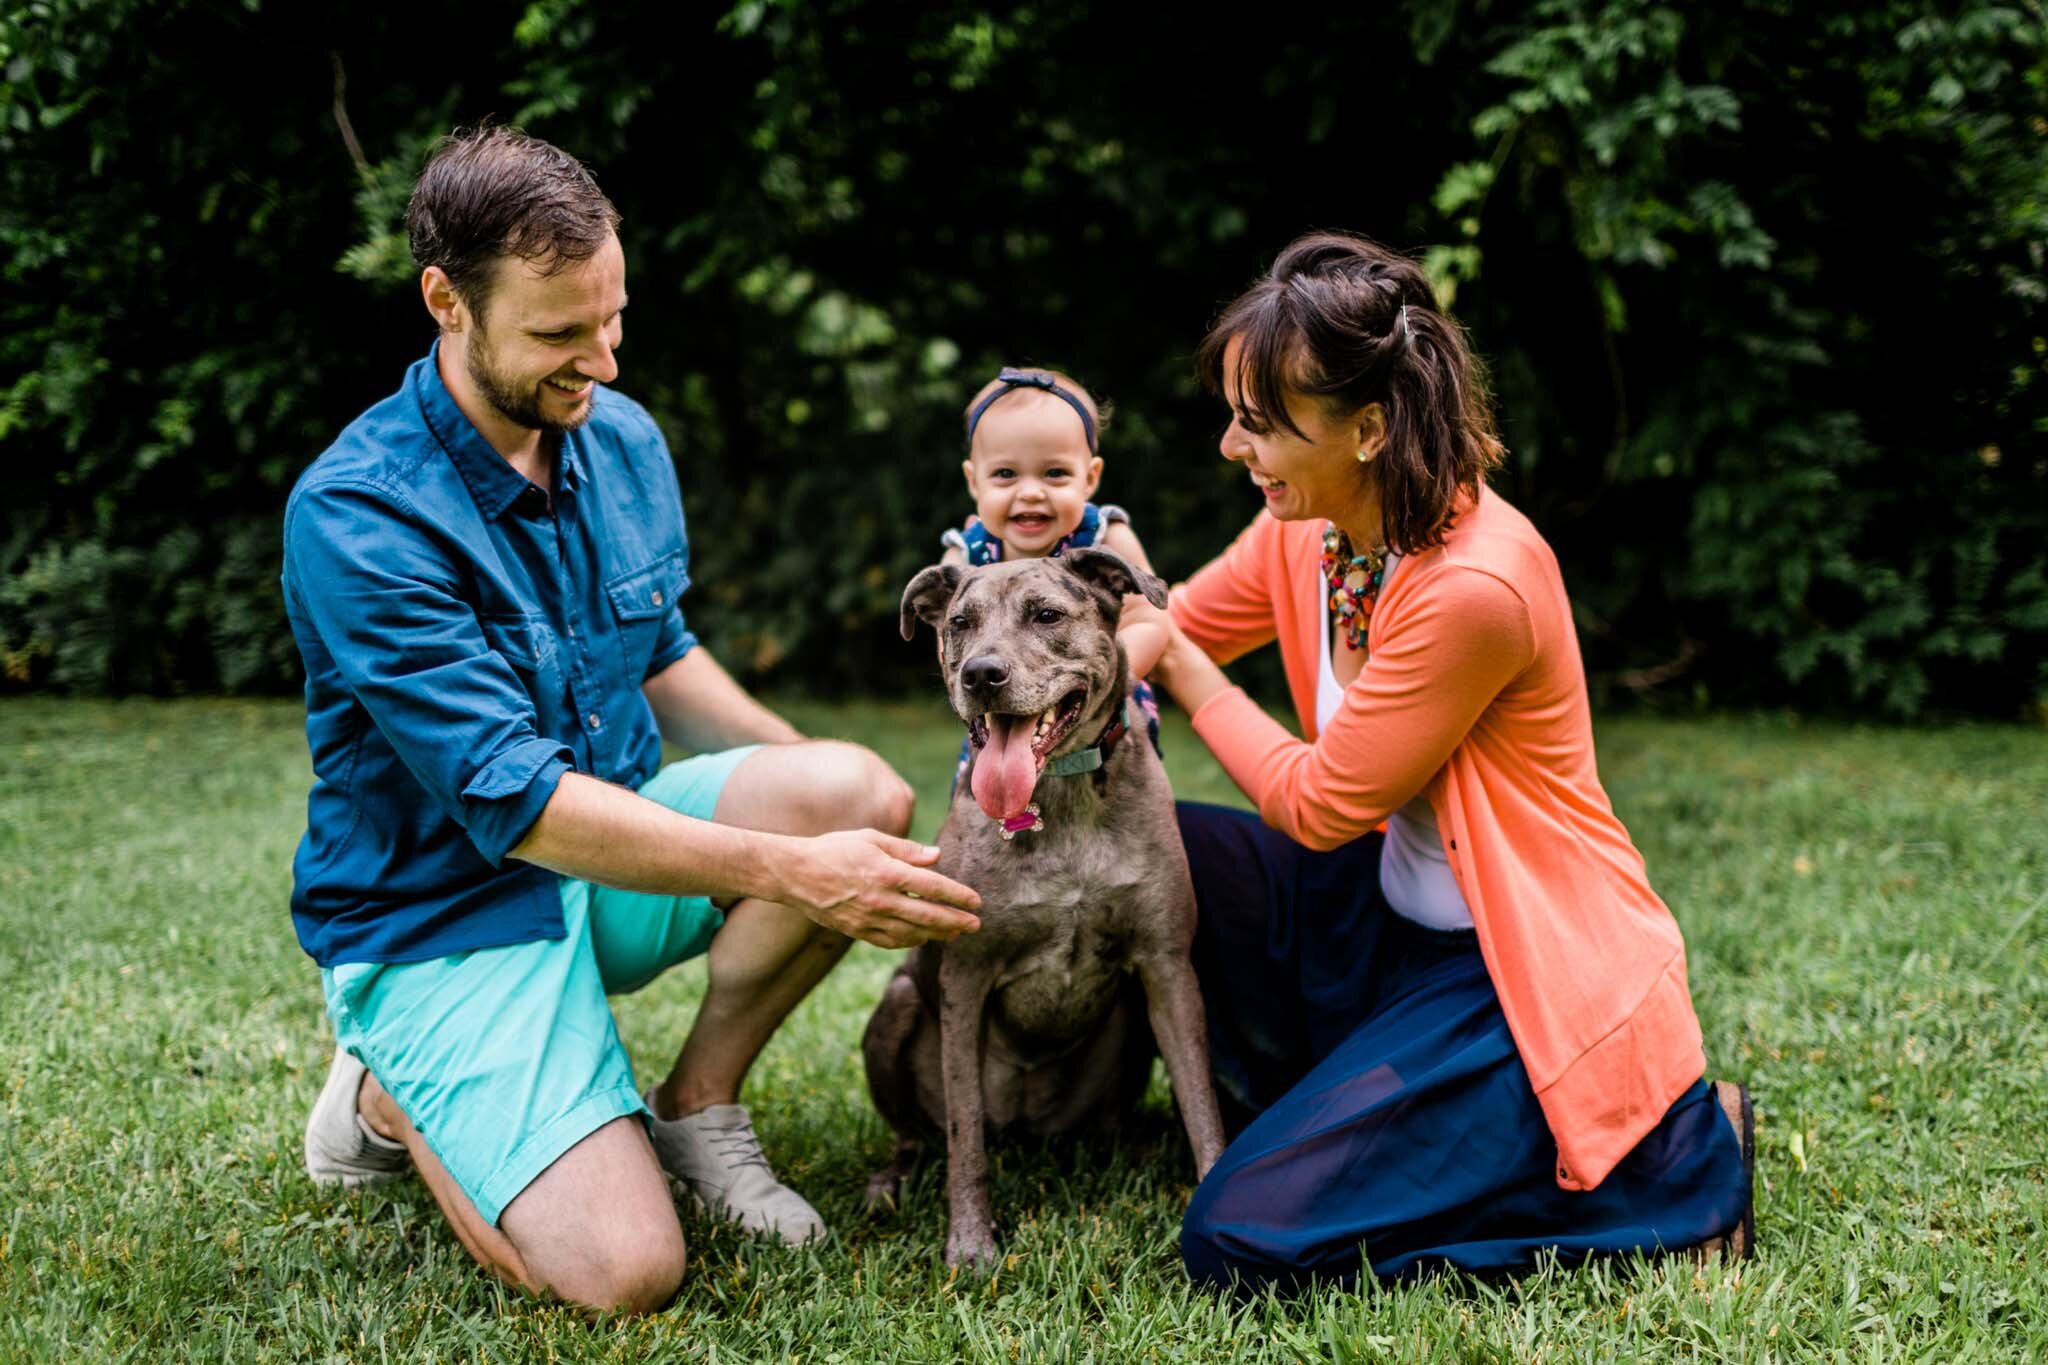 Raleigh Family Photographer | By G. Lin Photography | Candid portrait of family outside with baby girl sitting on dog